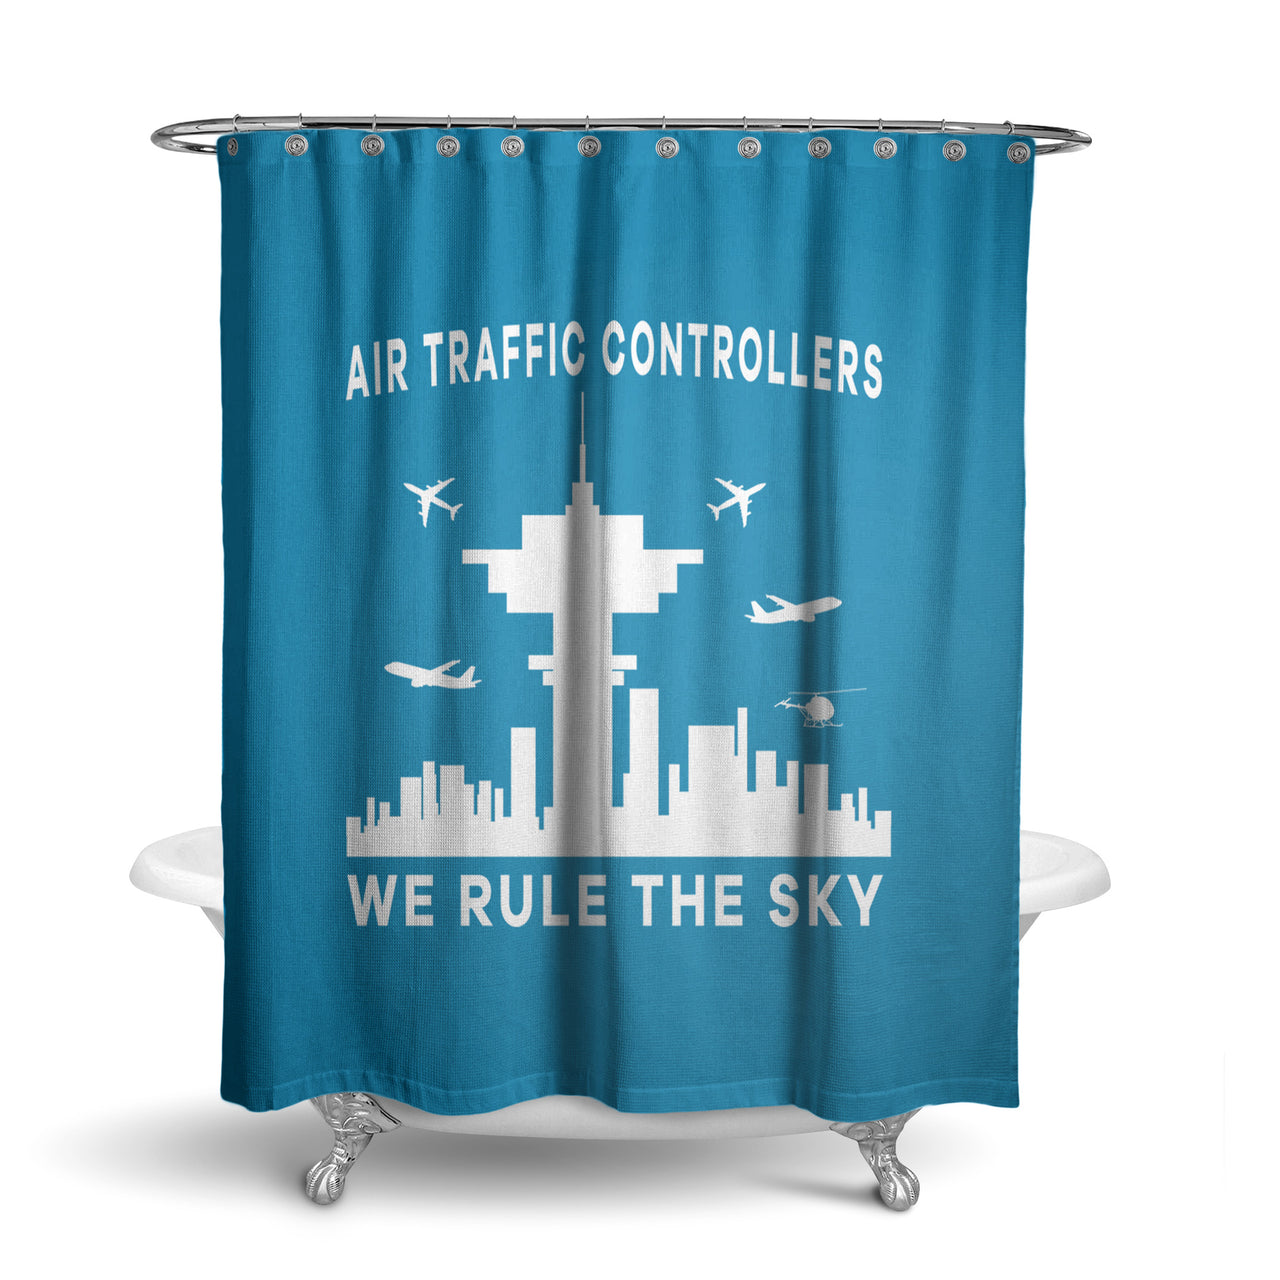 Air Traffic Controllers - We Rule The Sky Designed Shower Curtains